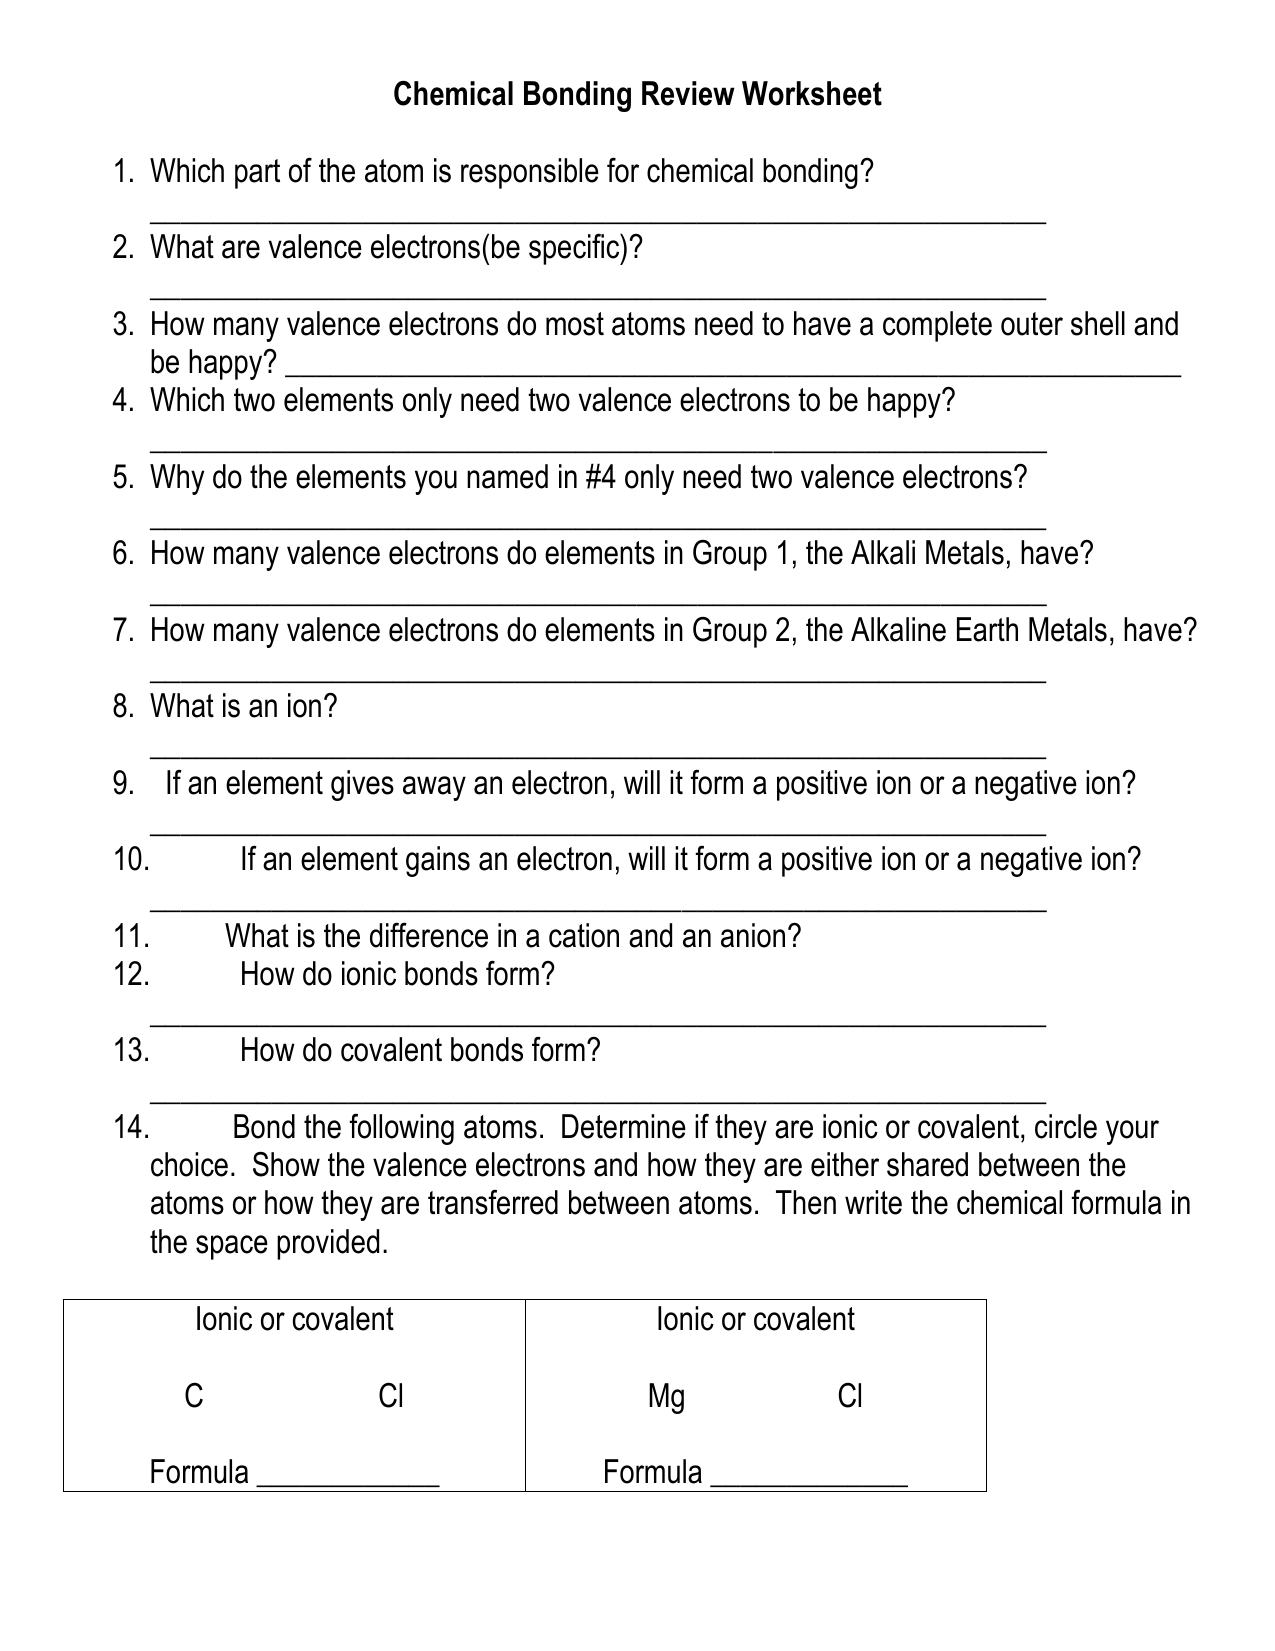 Chemical Bonding Review Worksheet Throughout Chemistry Review Worksheet Answers